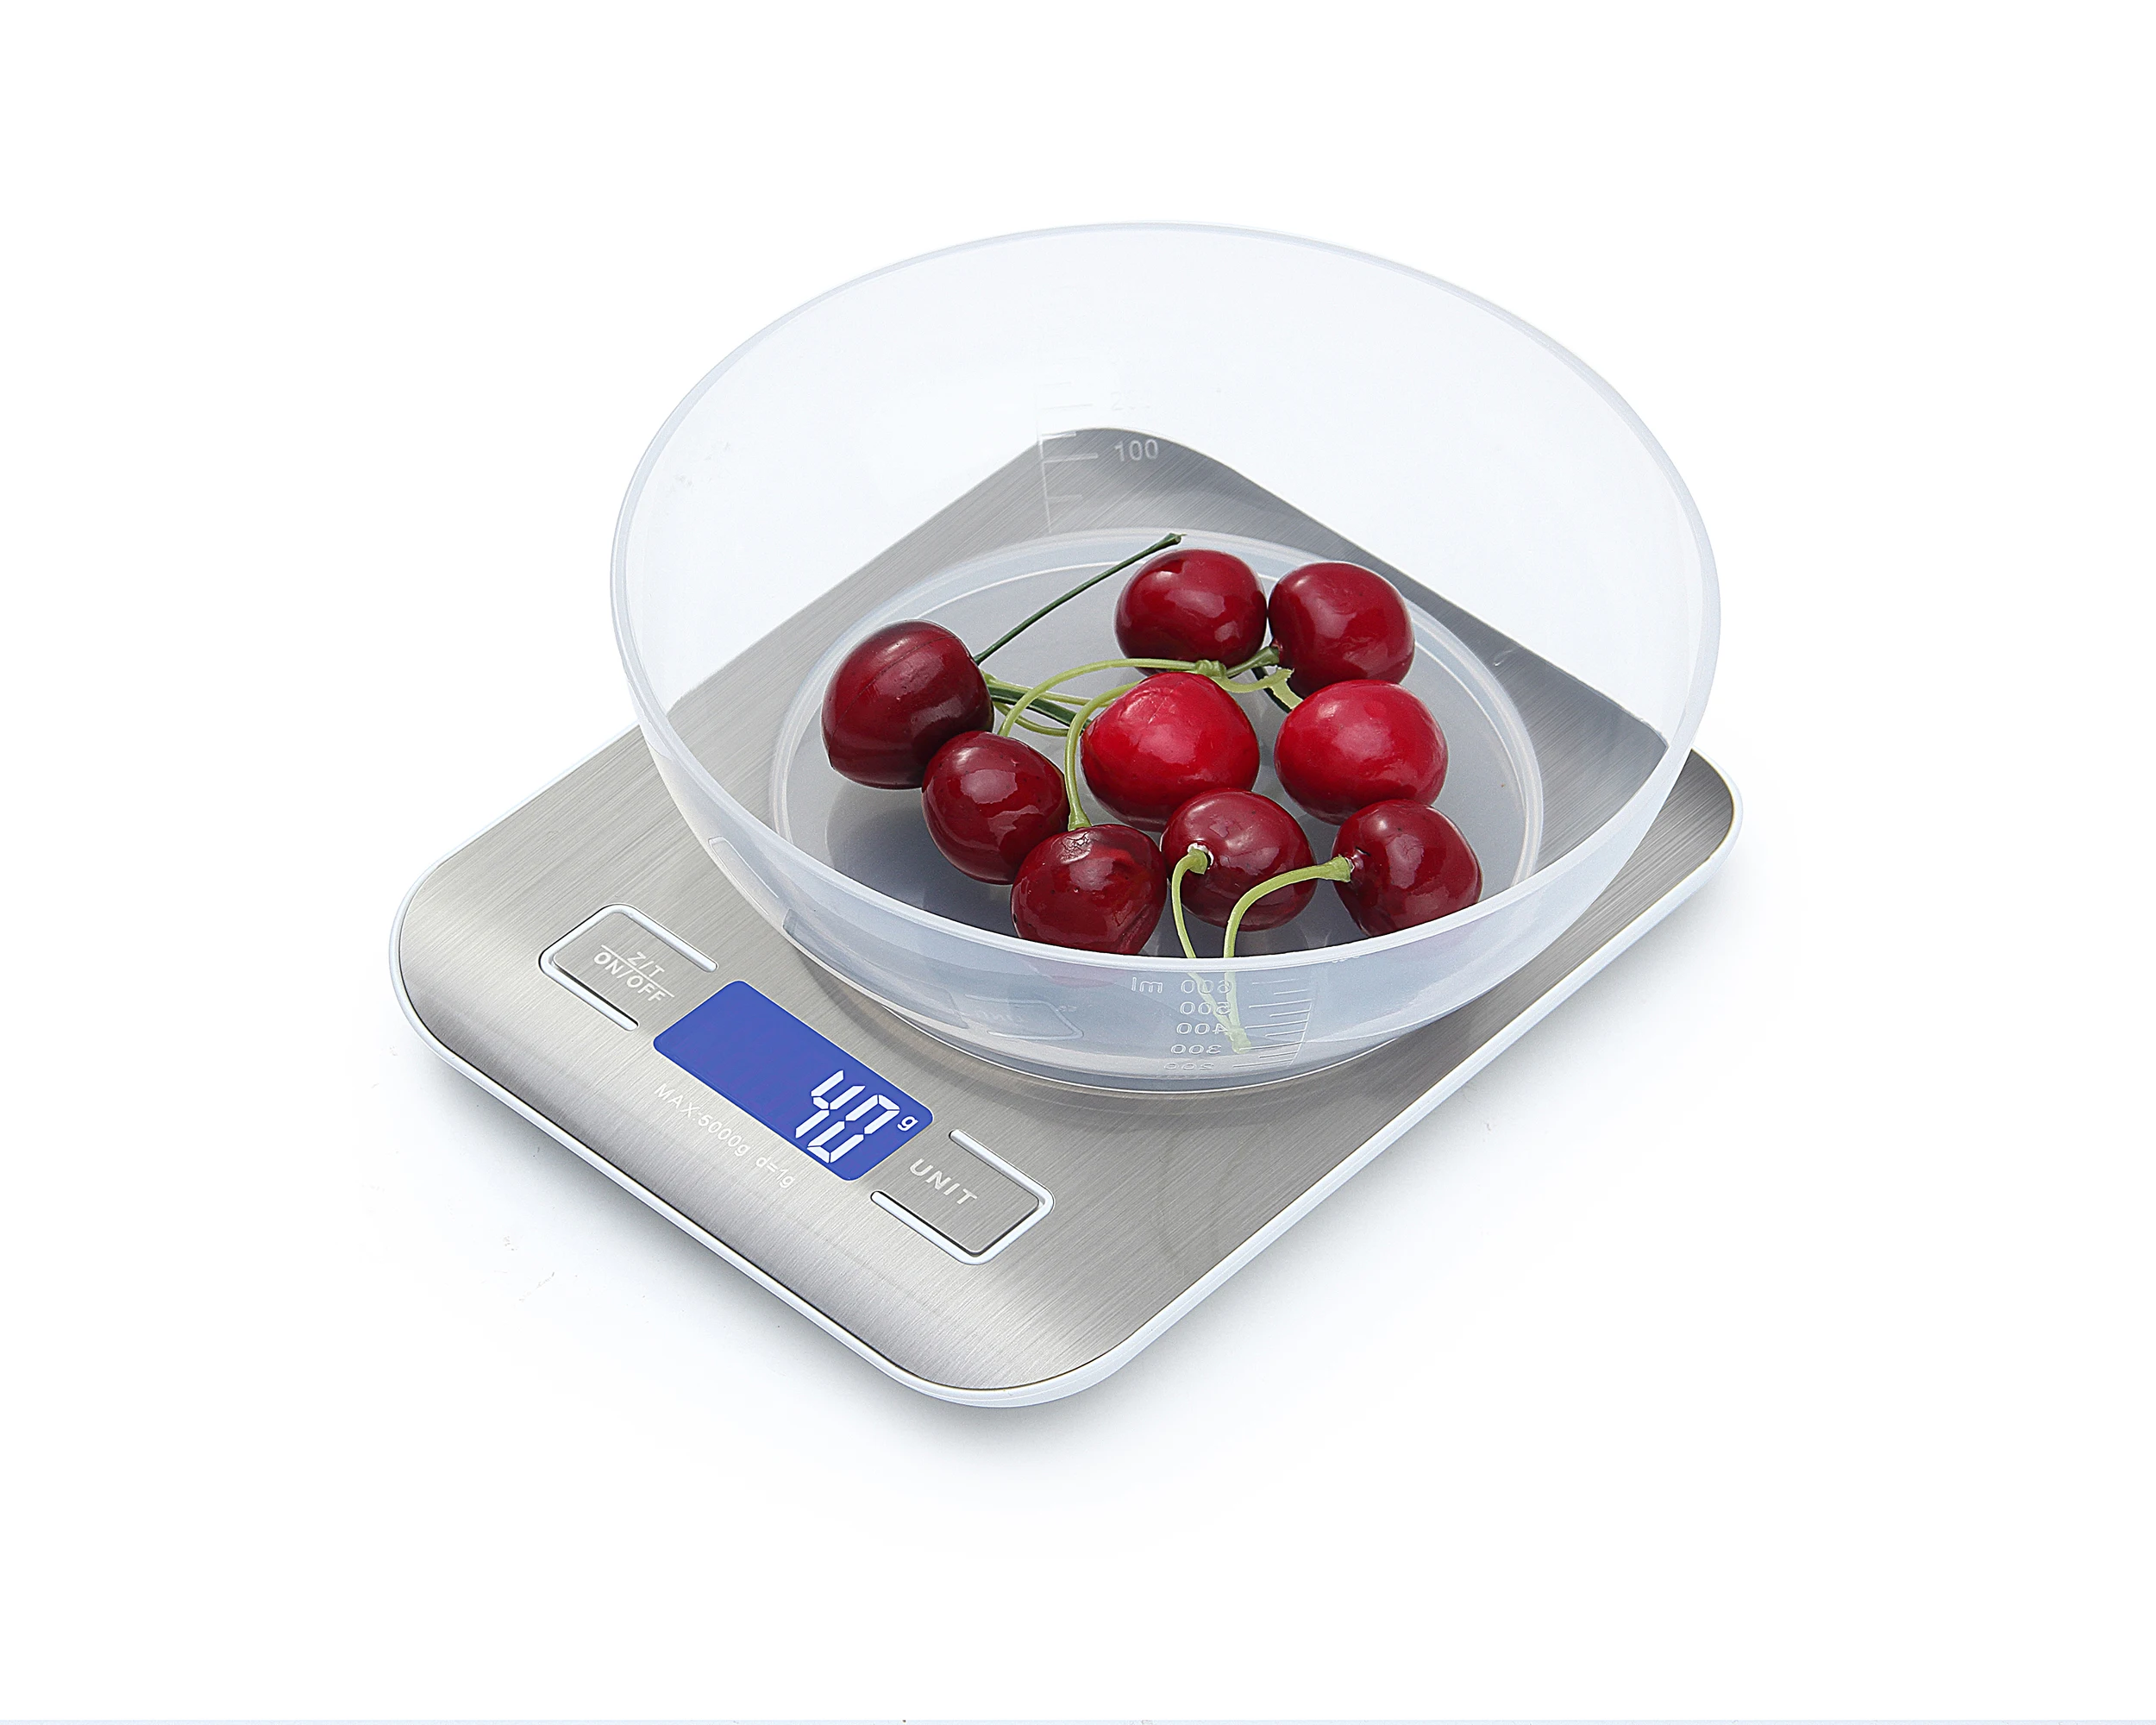 

Novation Launchkey The Biggest Loser Weed Scales Kitchen Digital Cheap Food Weighing Egg Industrial Scale Mini Machines Small, Silver